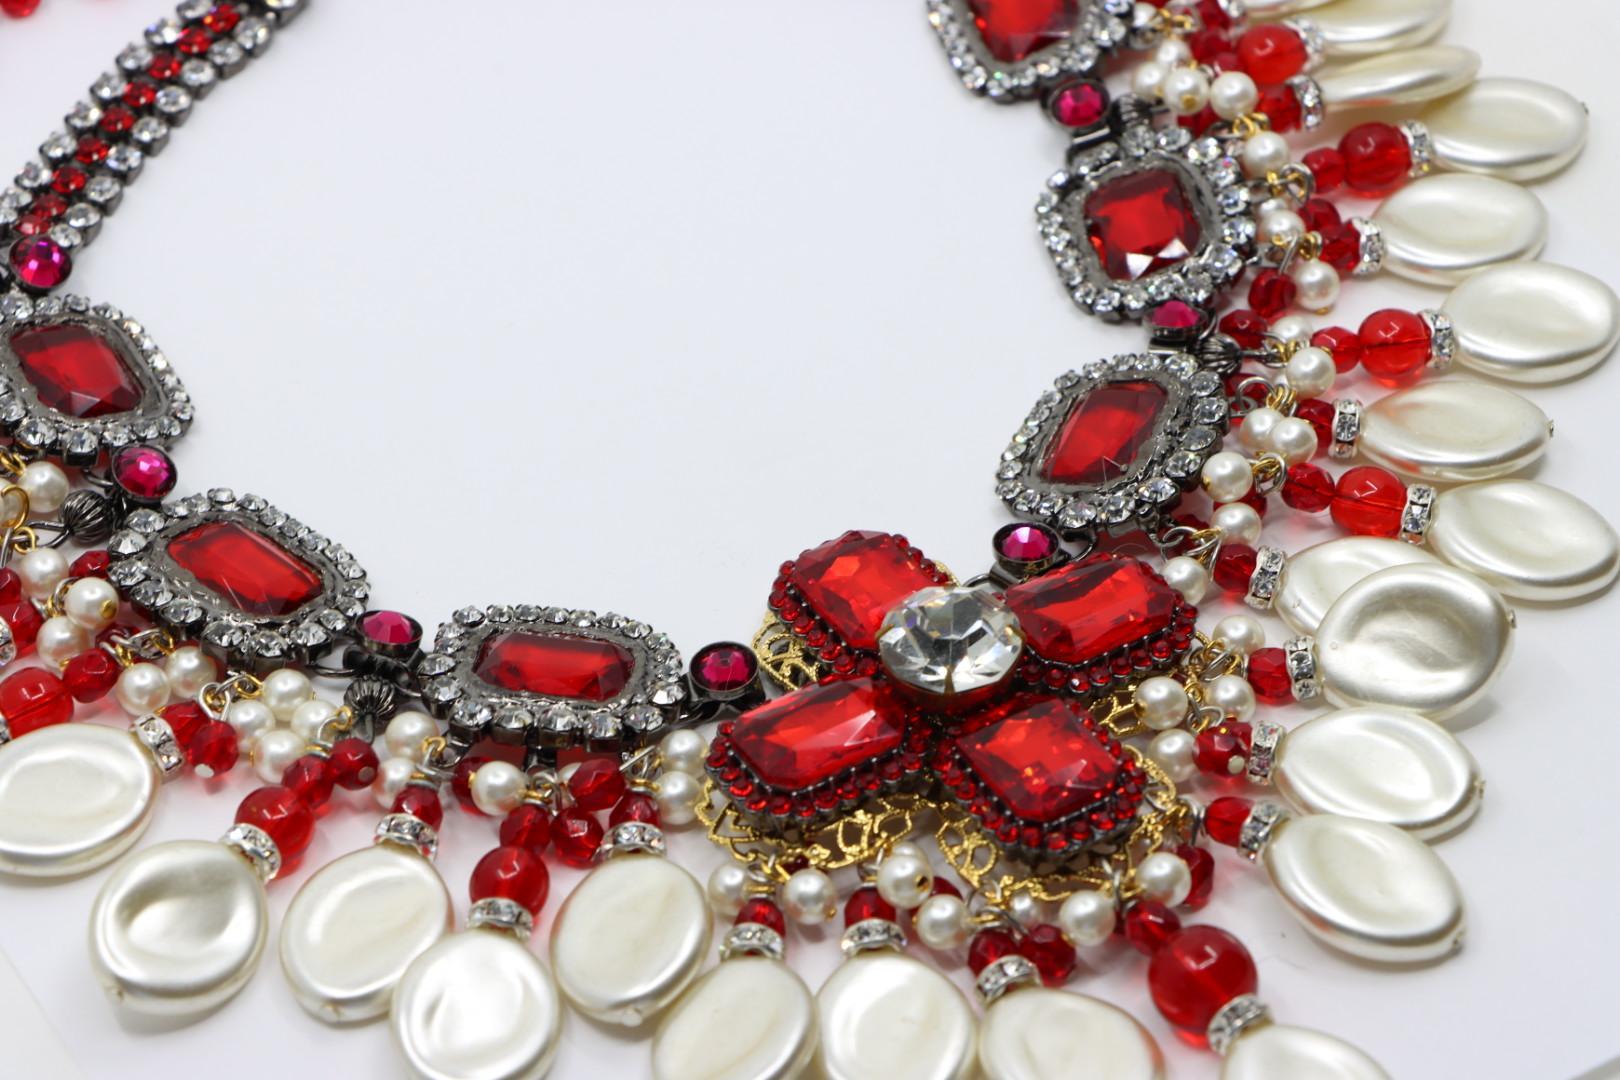 Rare Lawrence Vrba Red Rhinestone Faux Baroque Pearl Necklace & Earrings Parure For Sale 2